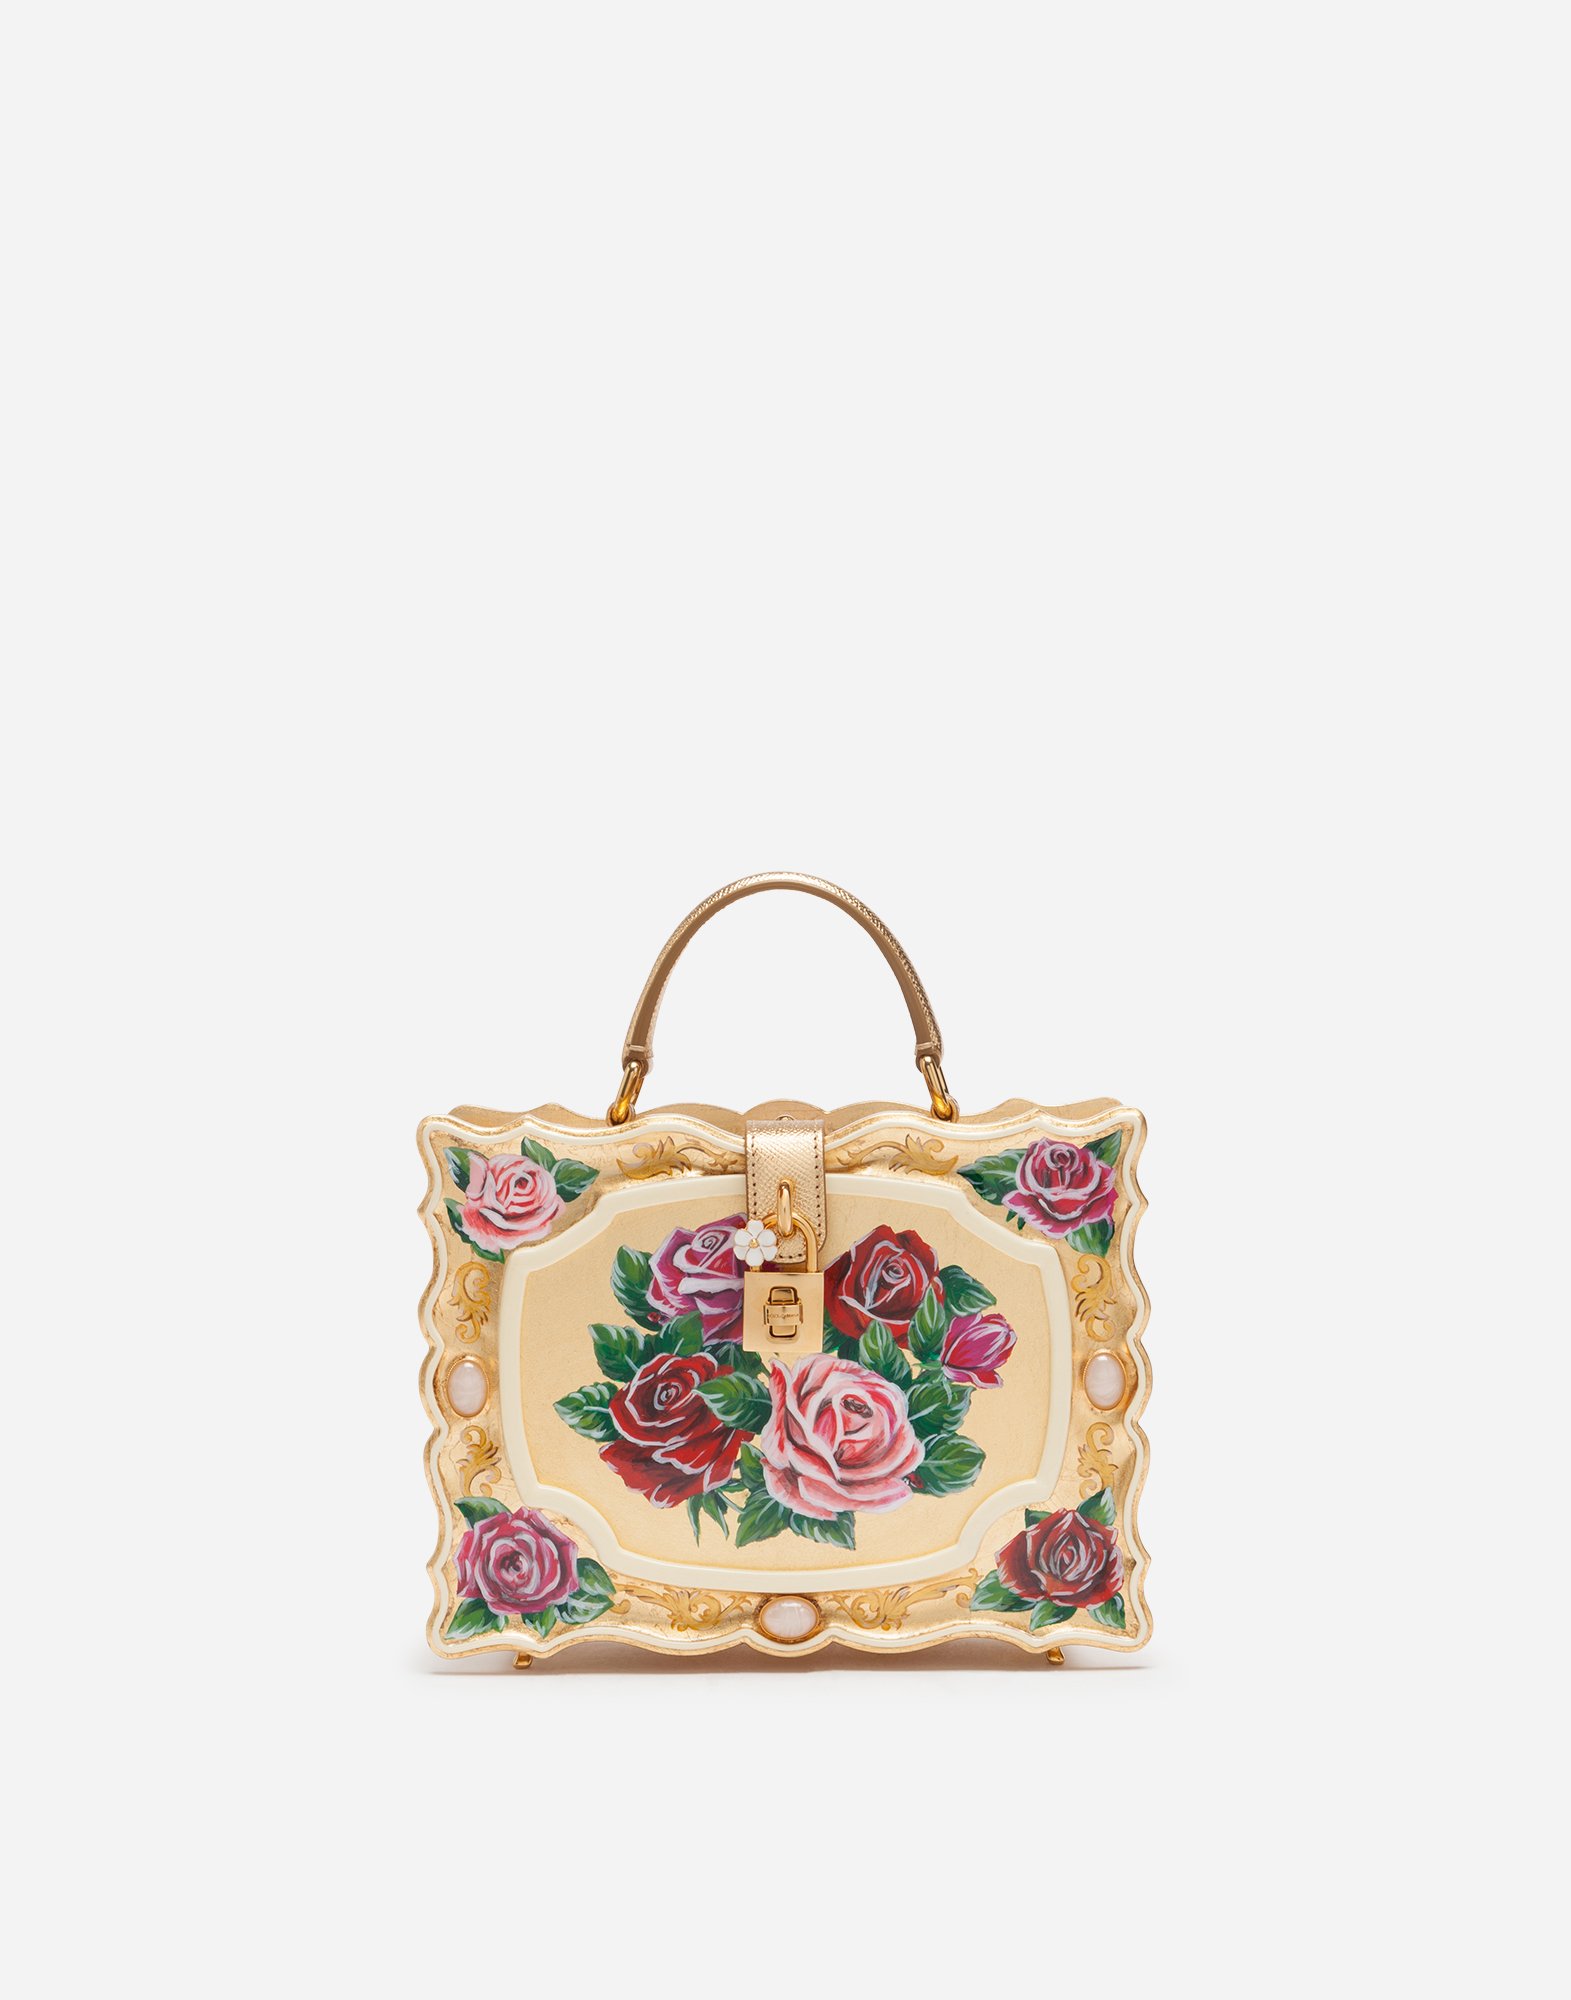 Dolce & Gabbana Dolce Box Bag In Golden Hand-painted Wood In Multicolor